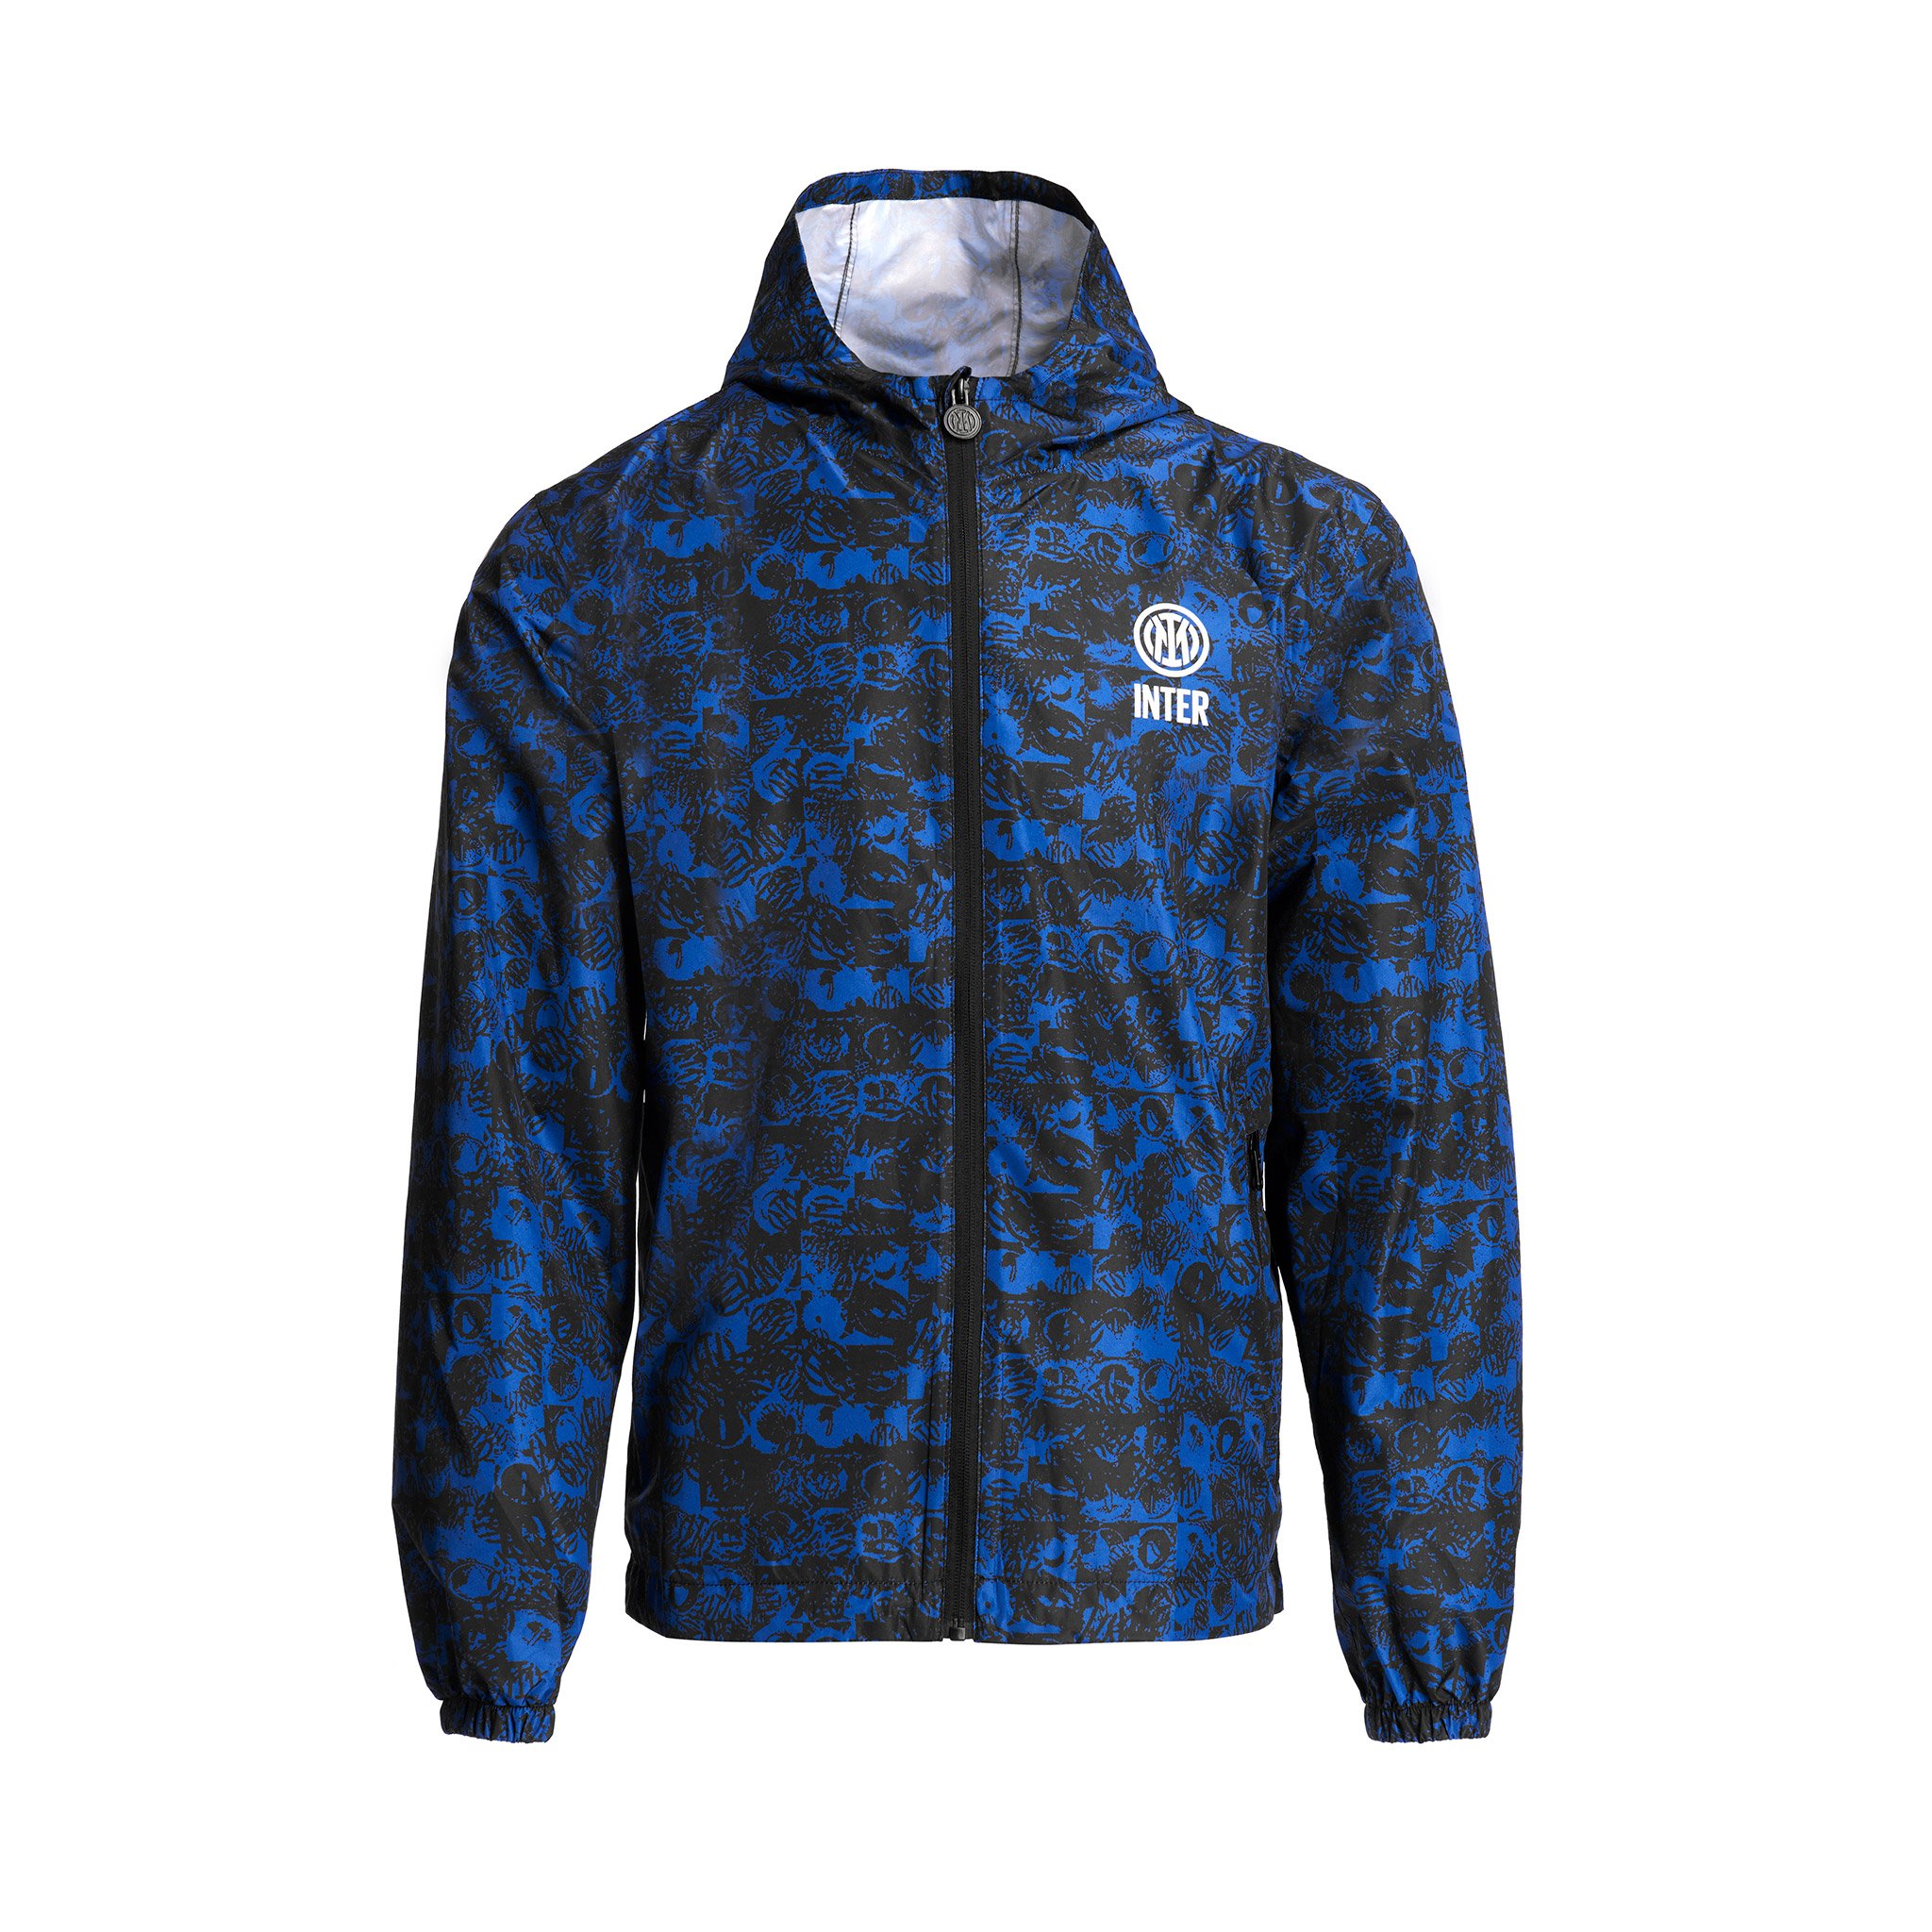 IM ALL-OVER PATTERN JACKET | Inter Online Store